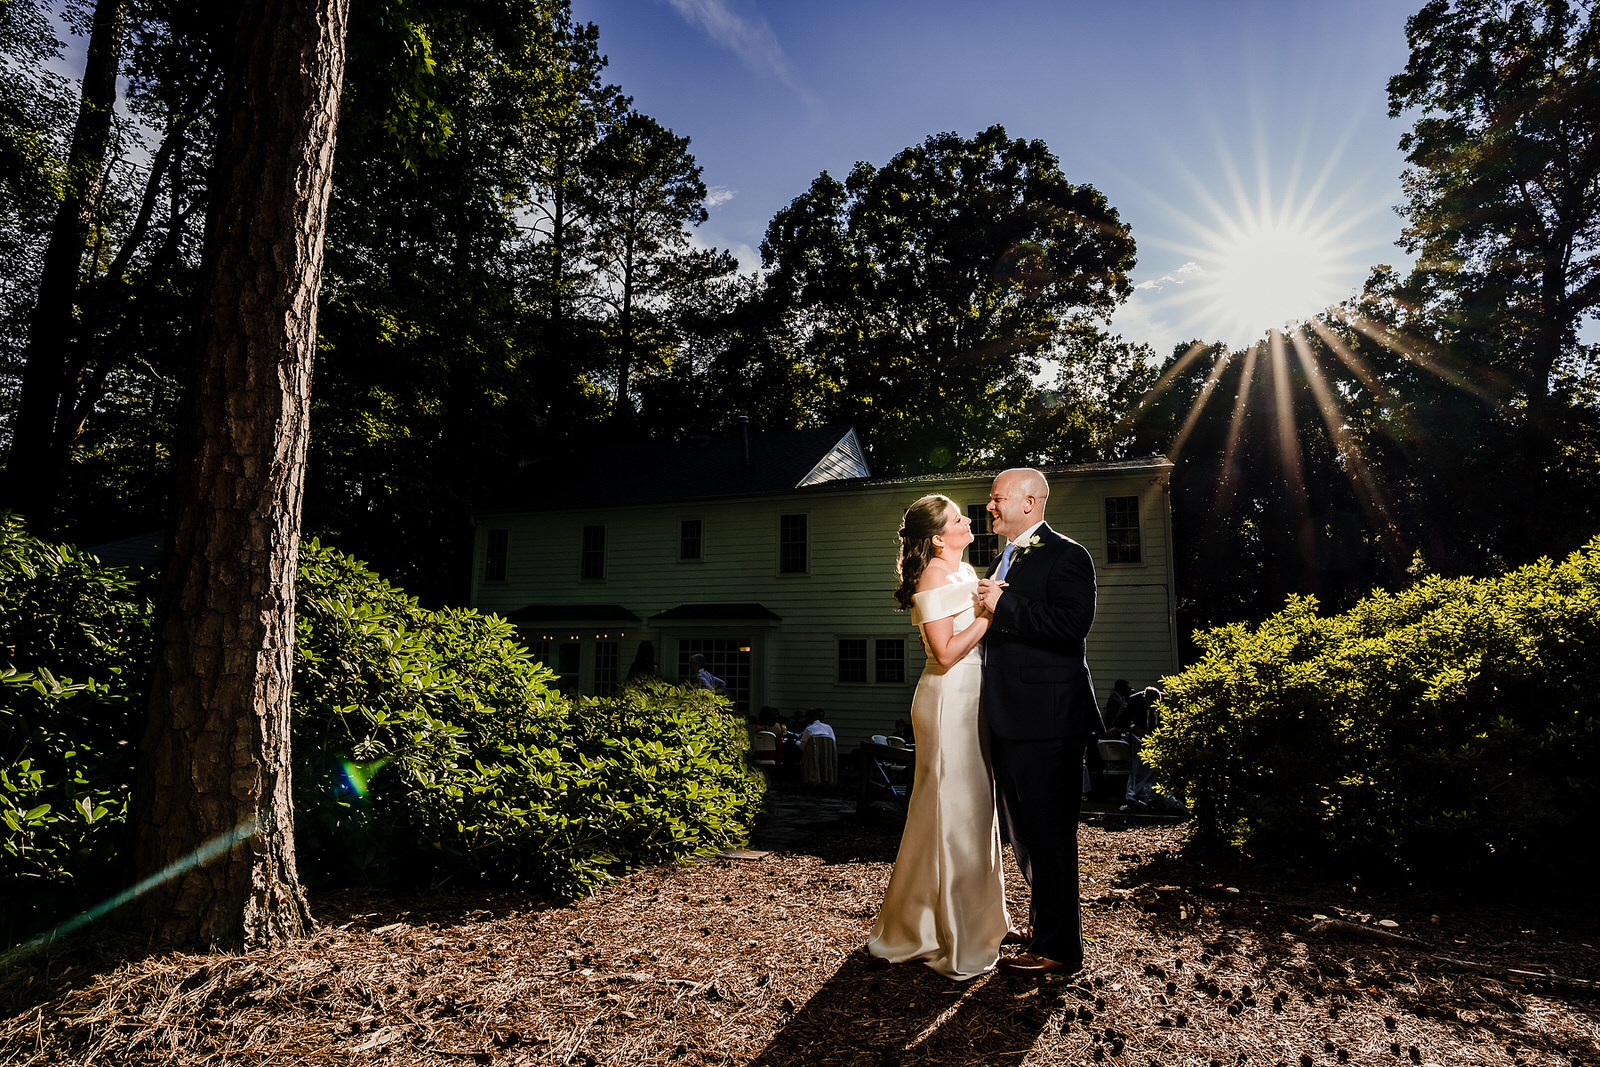 Dramatic wedding day portraits of bride and groom after their backyard ceremony